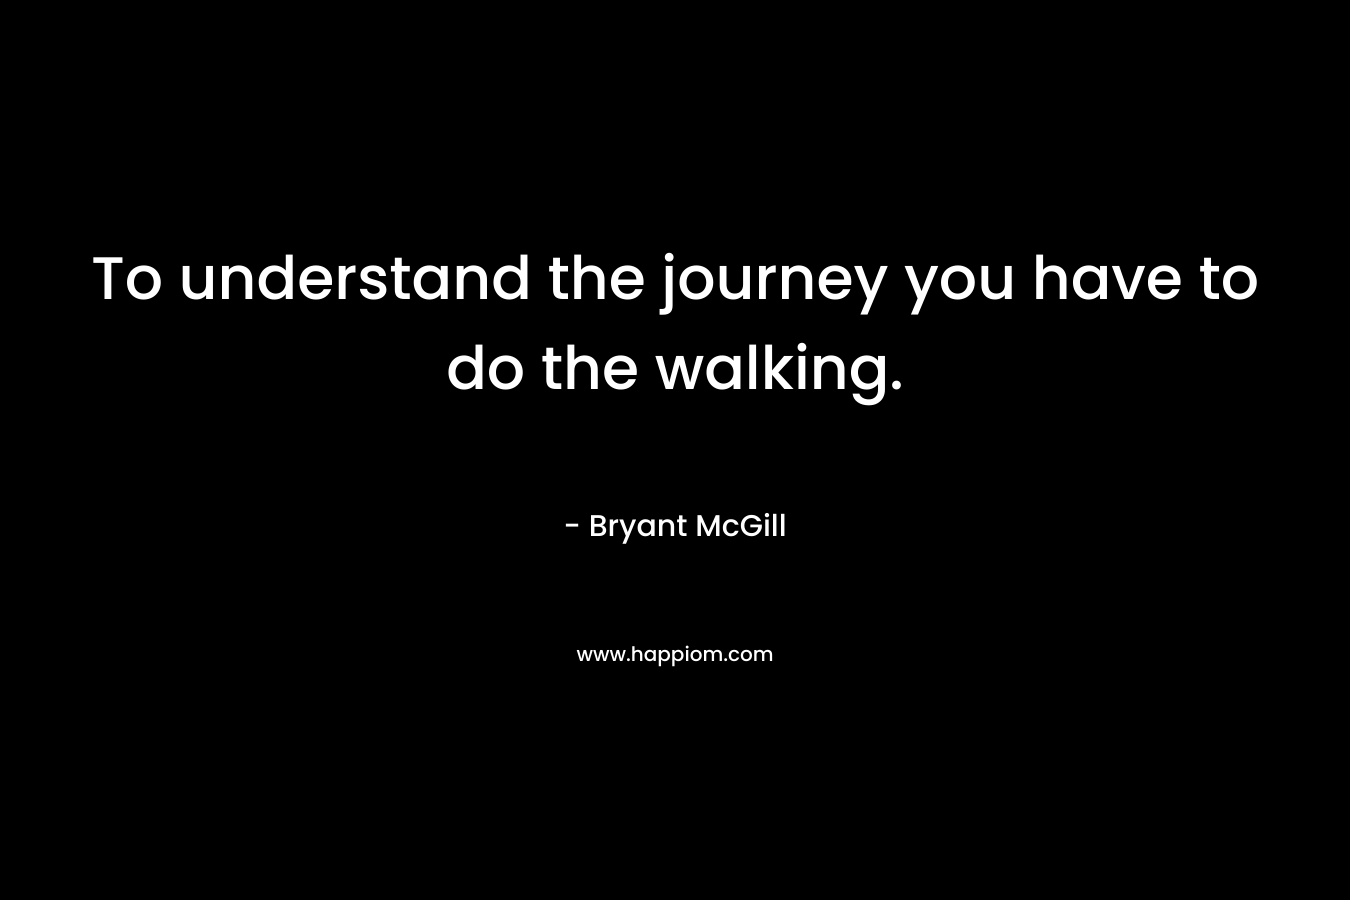 To understand the journey you have to do the walking.